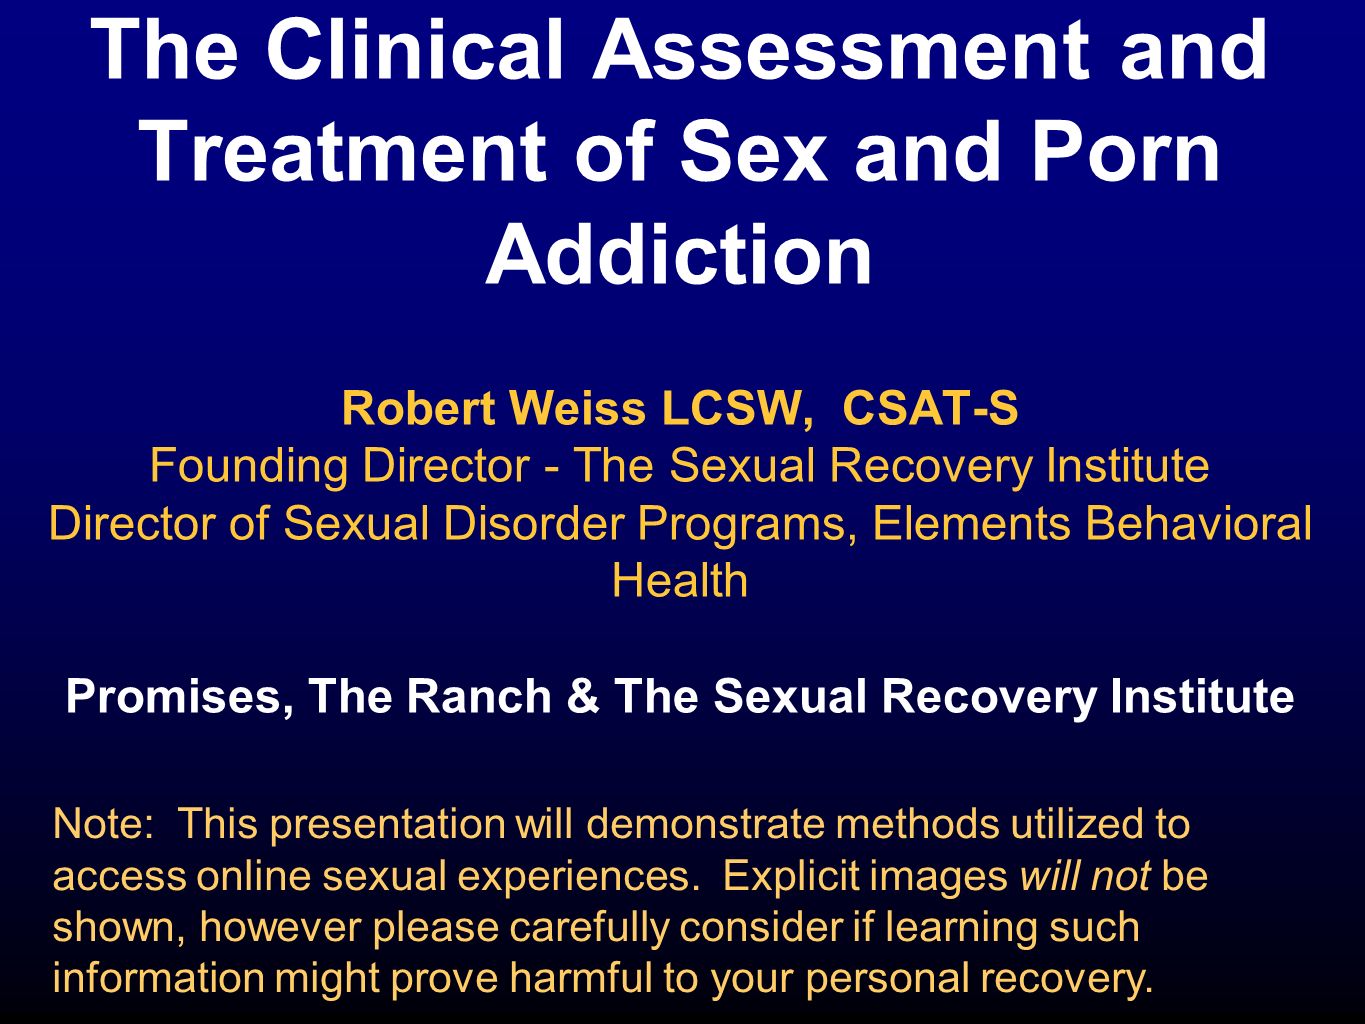 The Clinical Assessment and Treatment of Sex and Porn Addiction